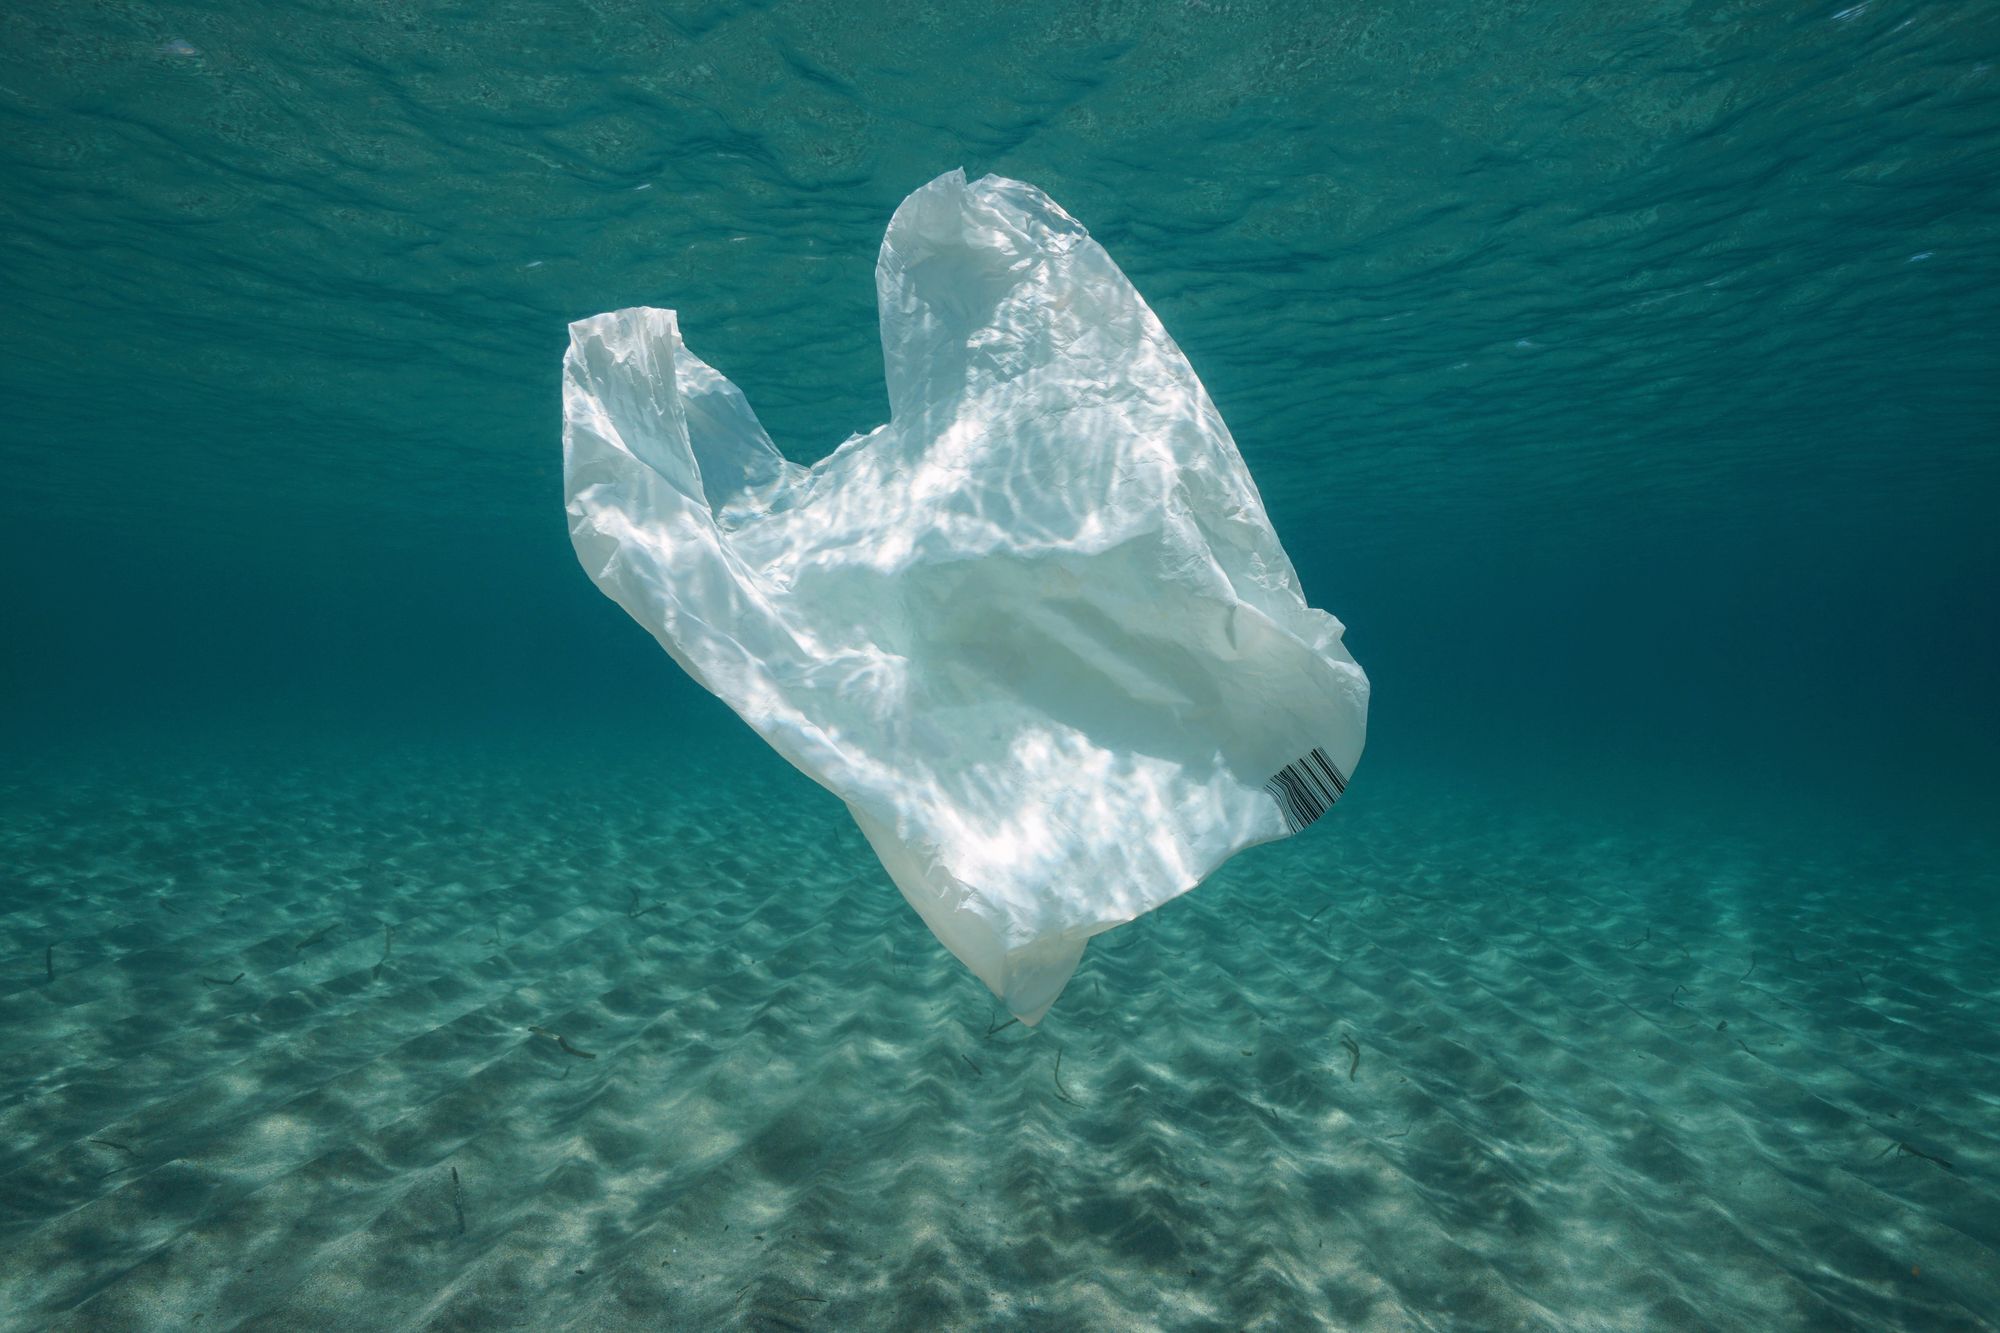 Reasons to Never Use Plastic Sandwich Bags Again as a Business